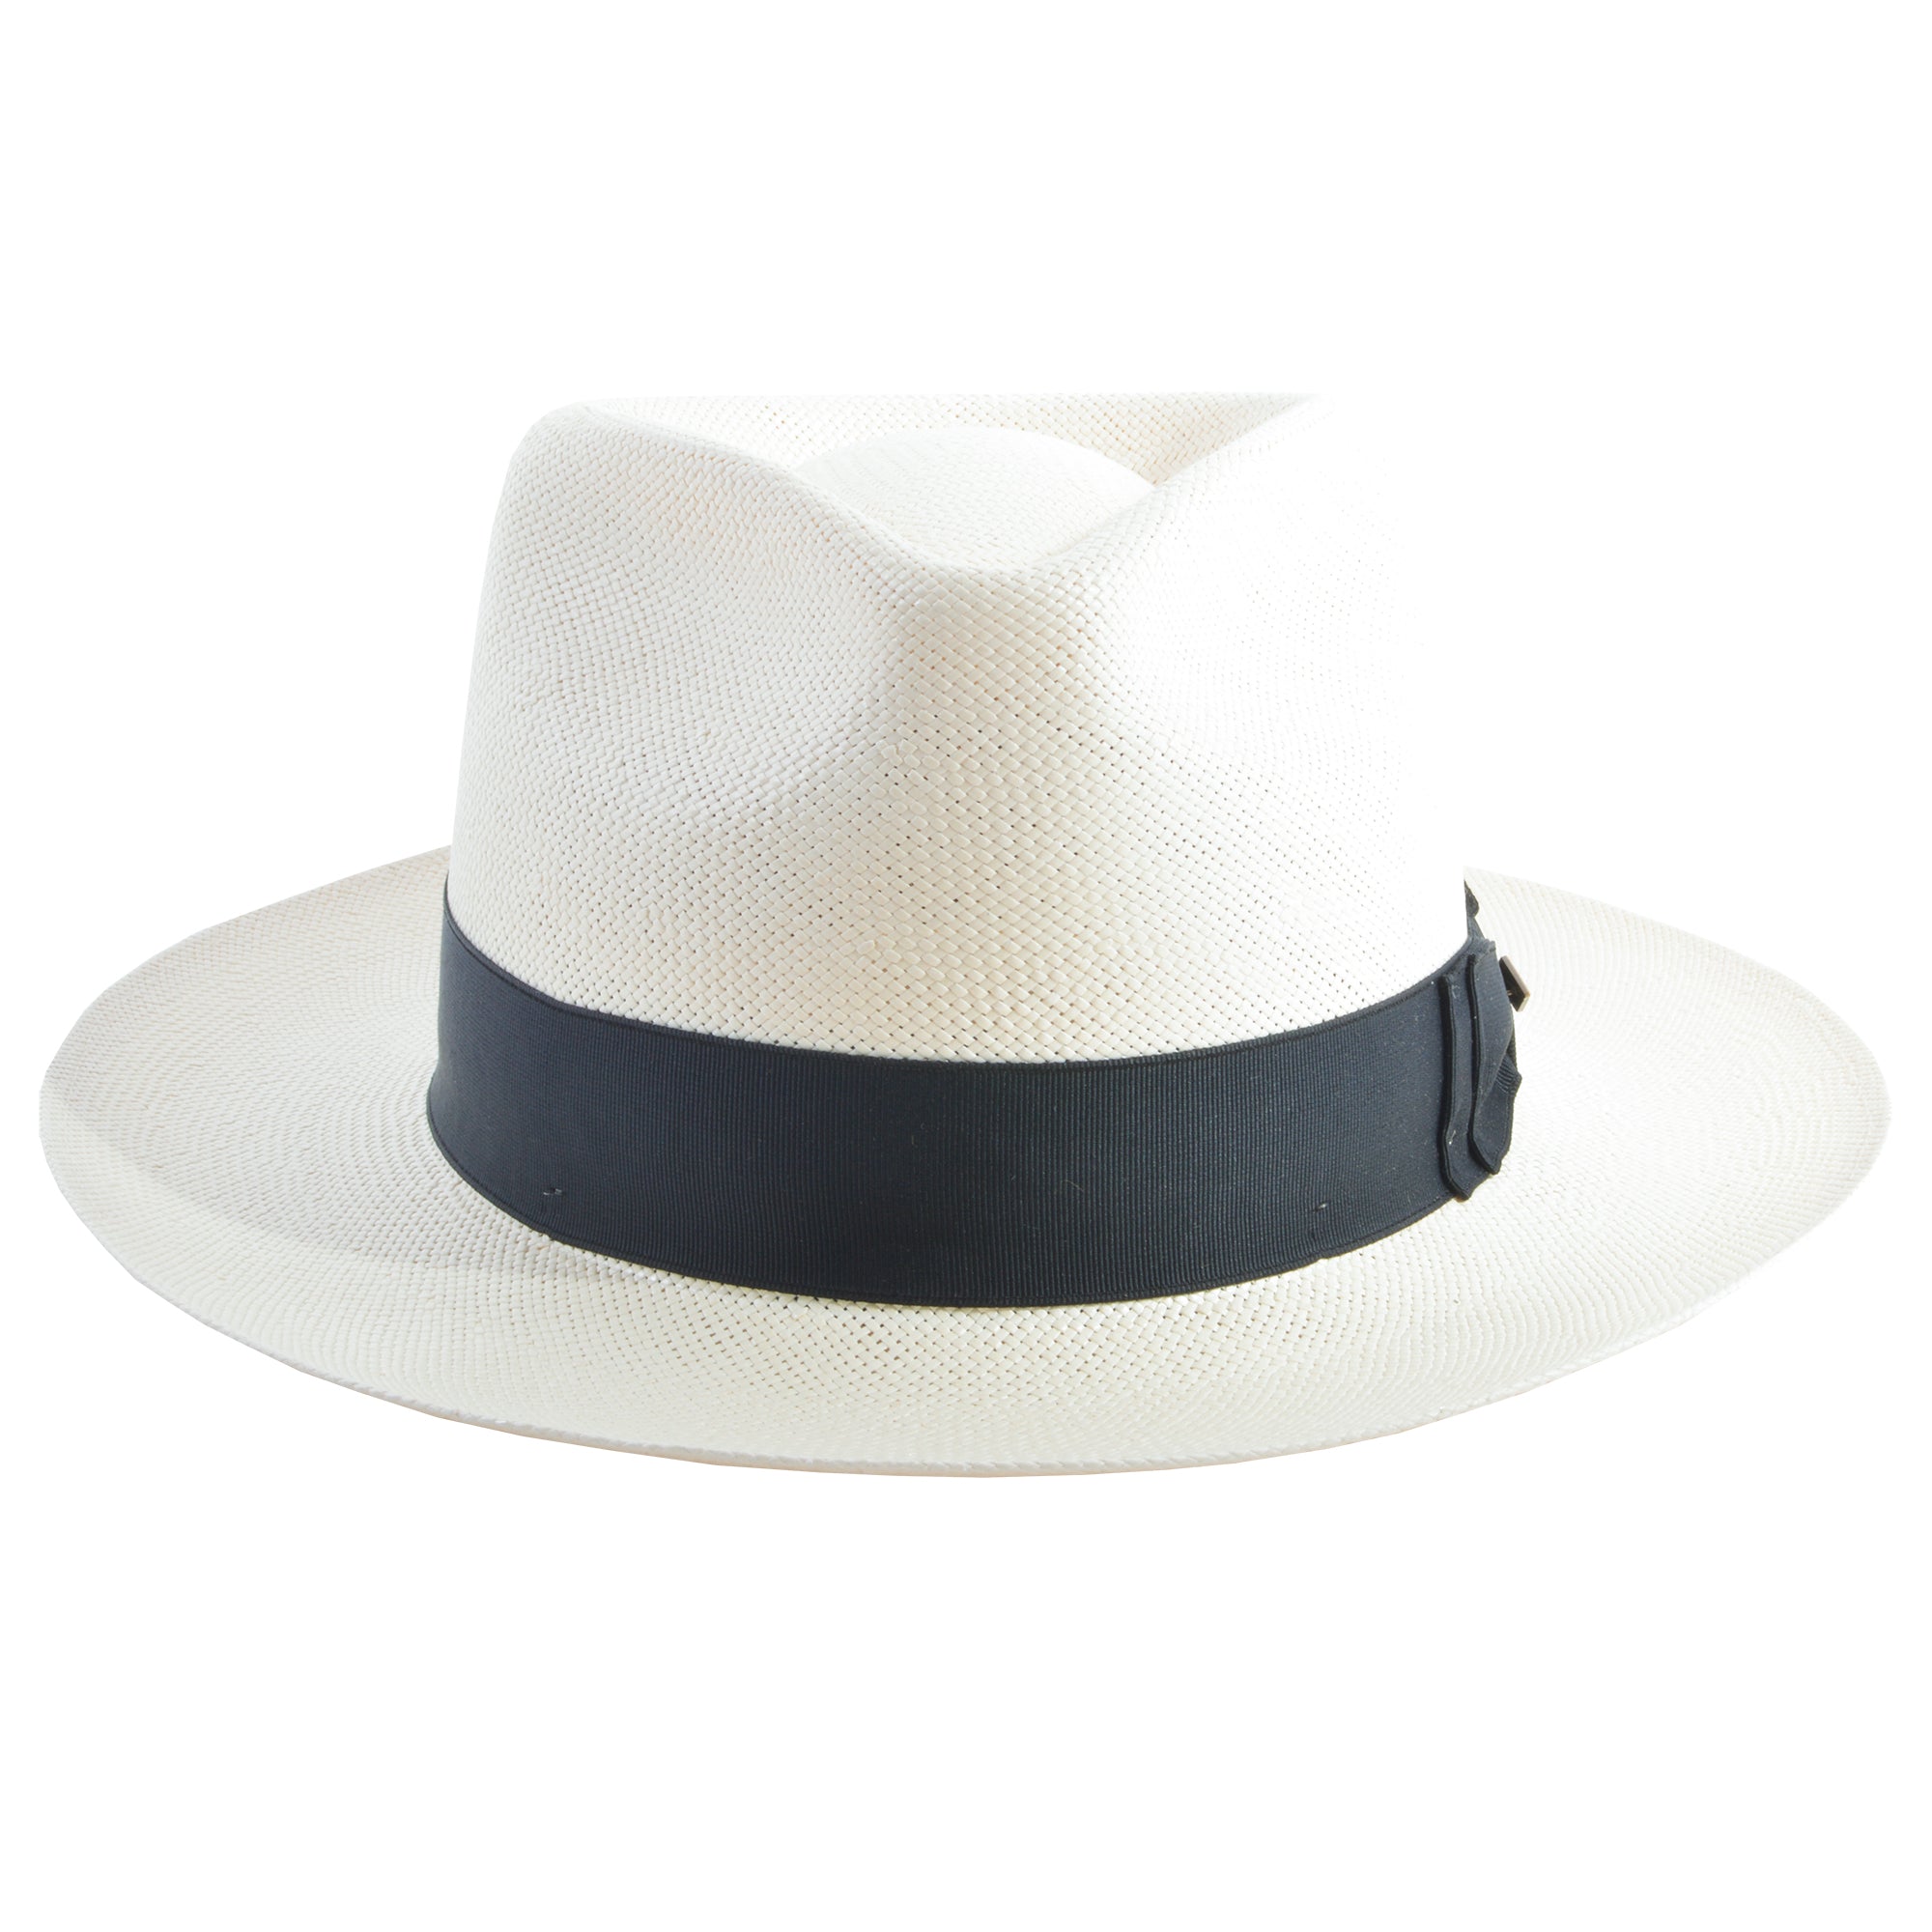 Stetson Ron Donegan Shantung Straw Hat with Hat Box